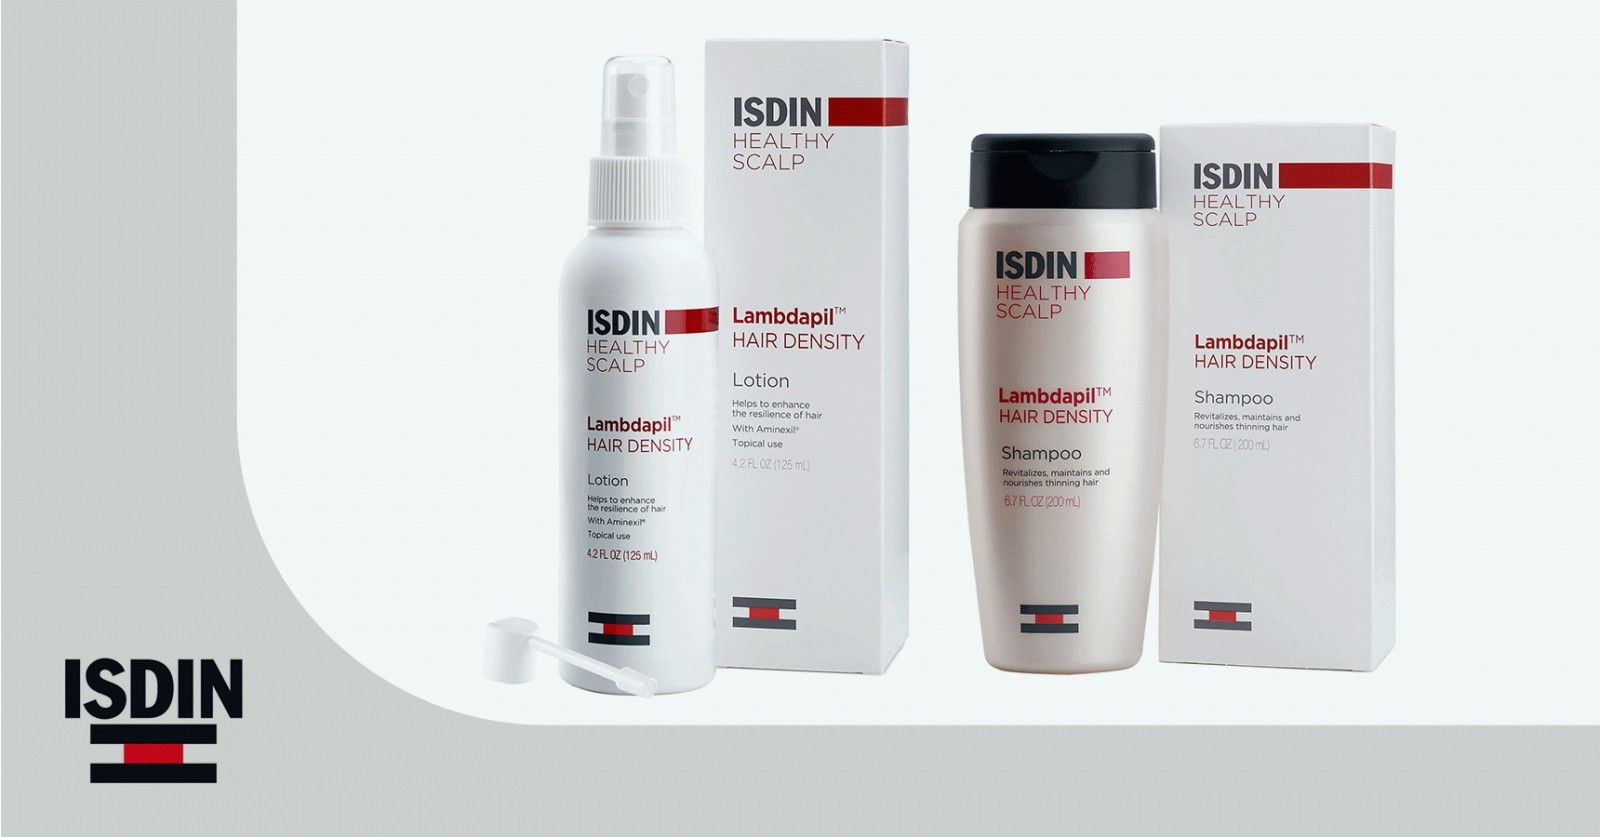 Isdin Lambdapil Hair Density lotion and shampoo treatment designed to nourish and revitalize thinning hair.